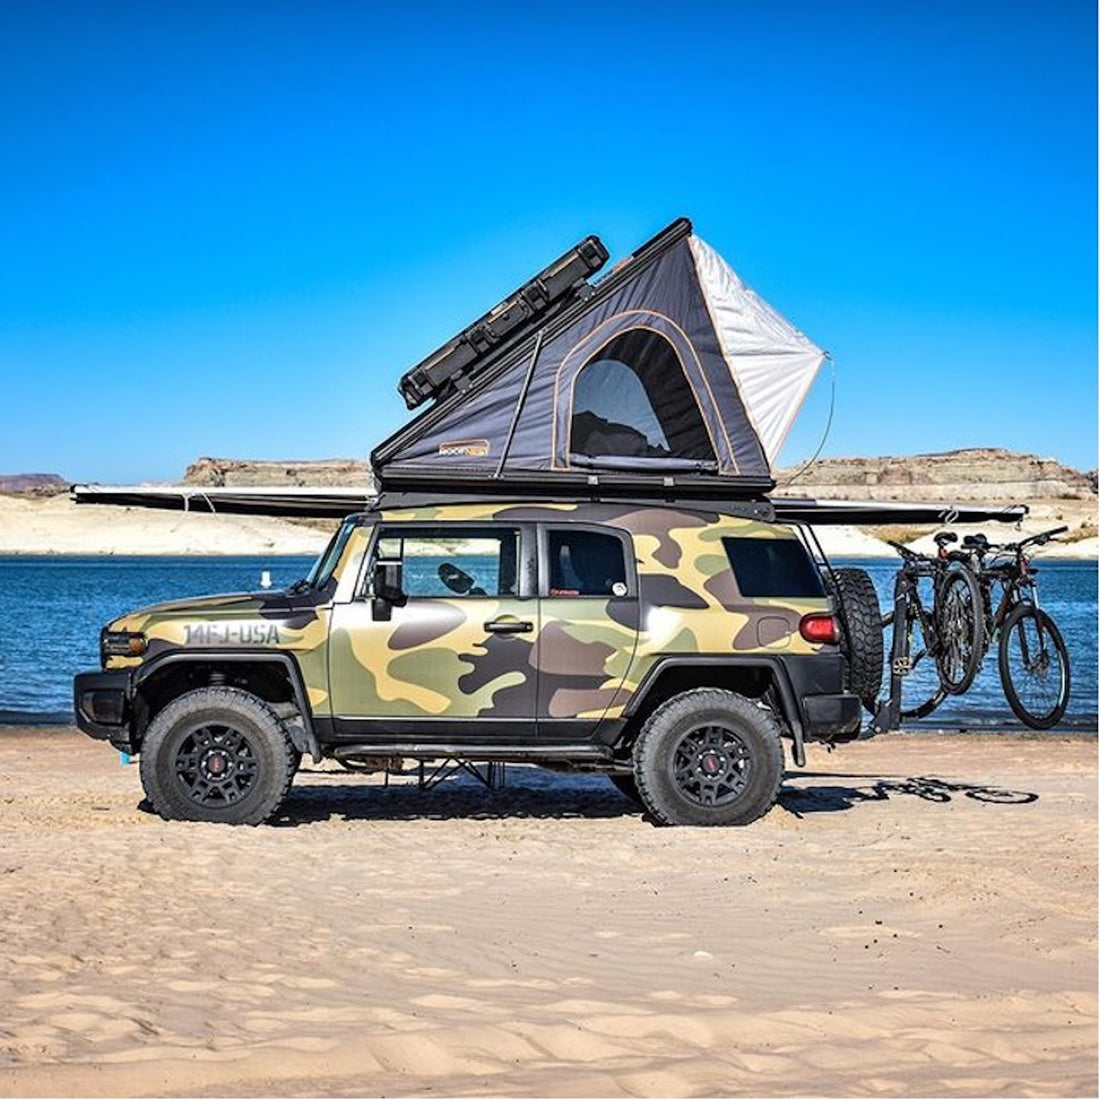 Check Out Our Roofnest Rig of the Month: March 2021